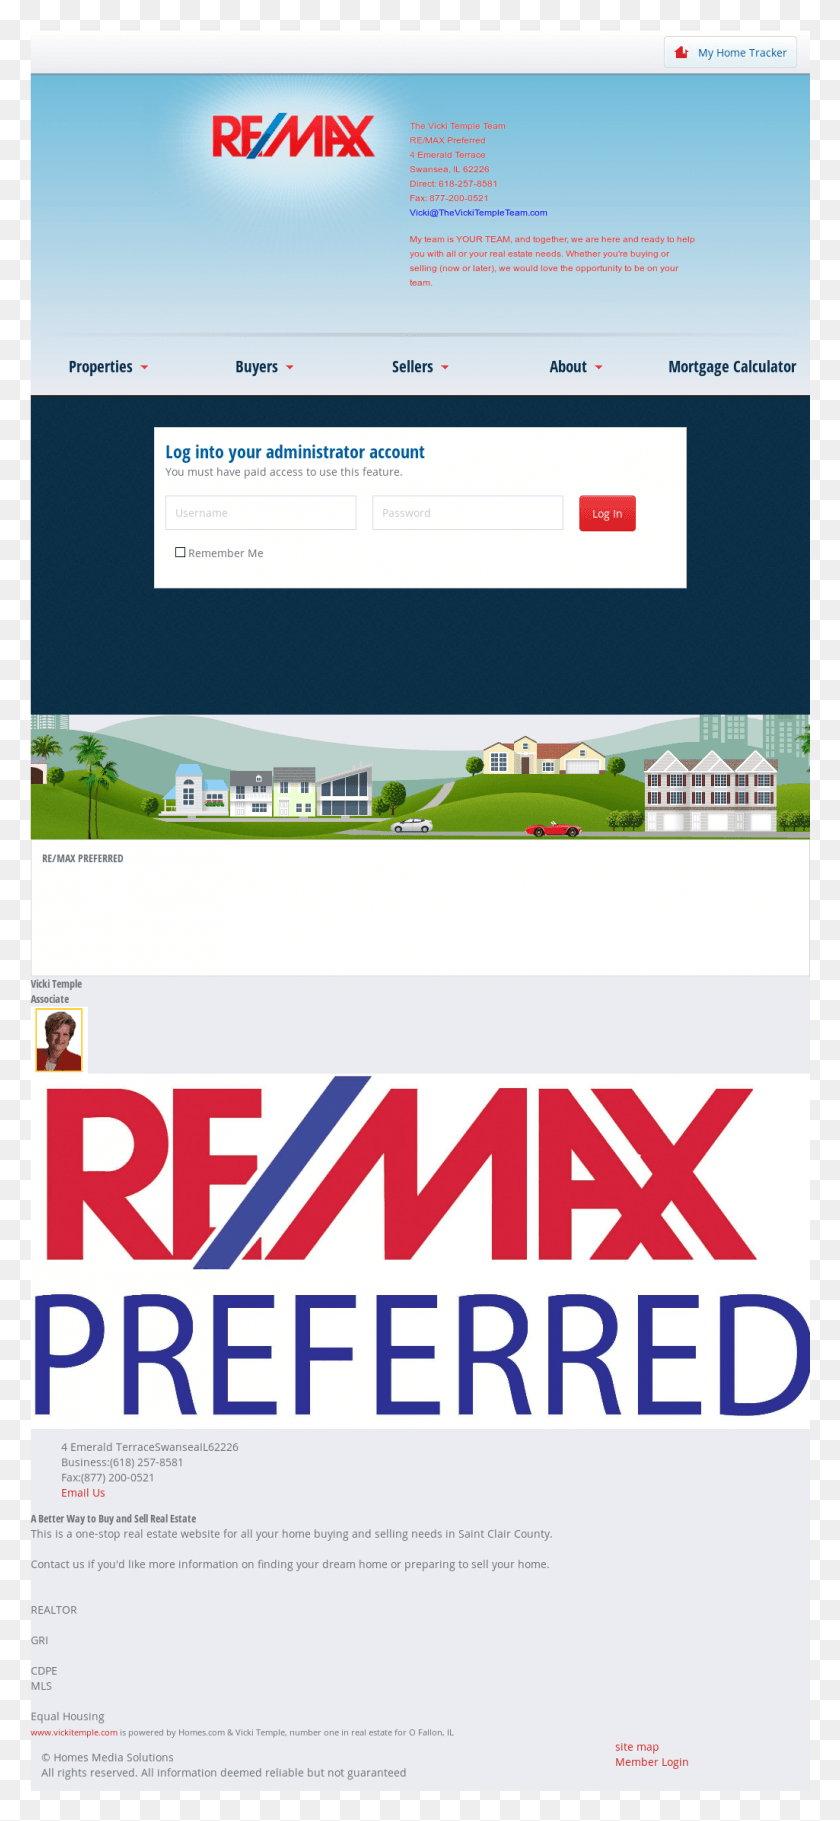 1025x2315 Tiffin Services And Solutions Competitors Revenue Remax, Person, Human, Text Descargar Hd Png